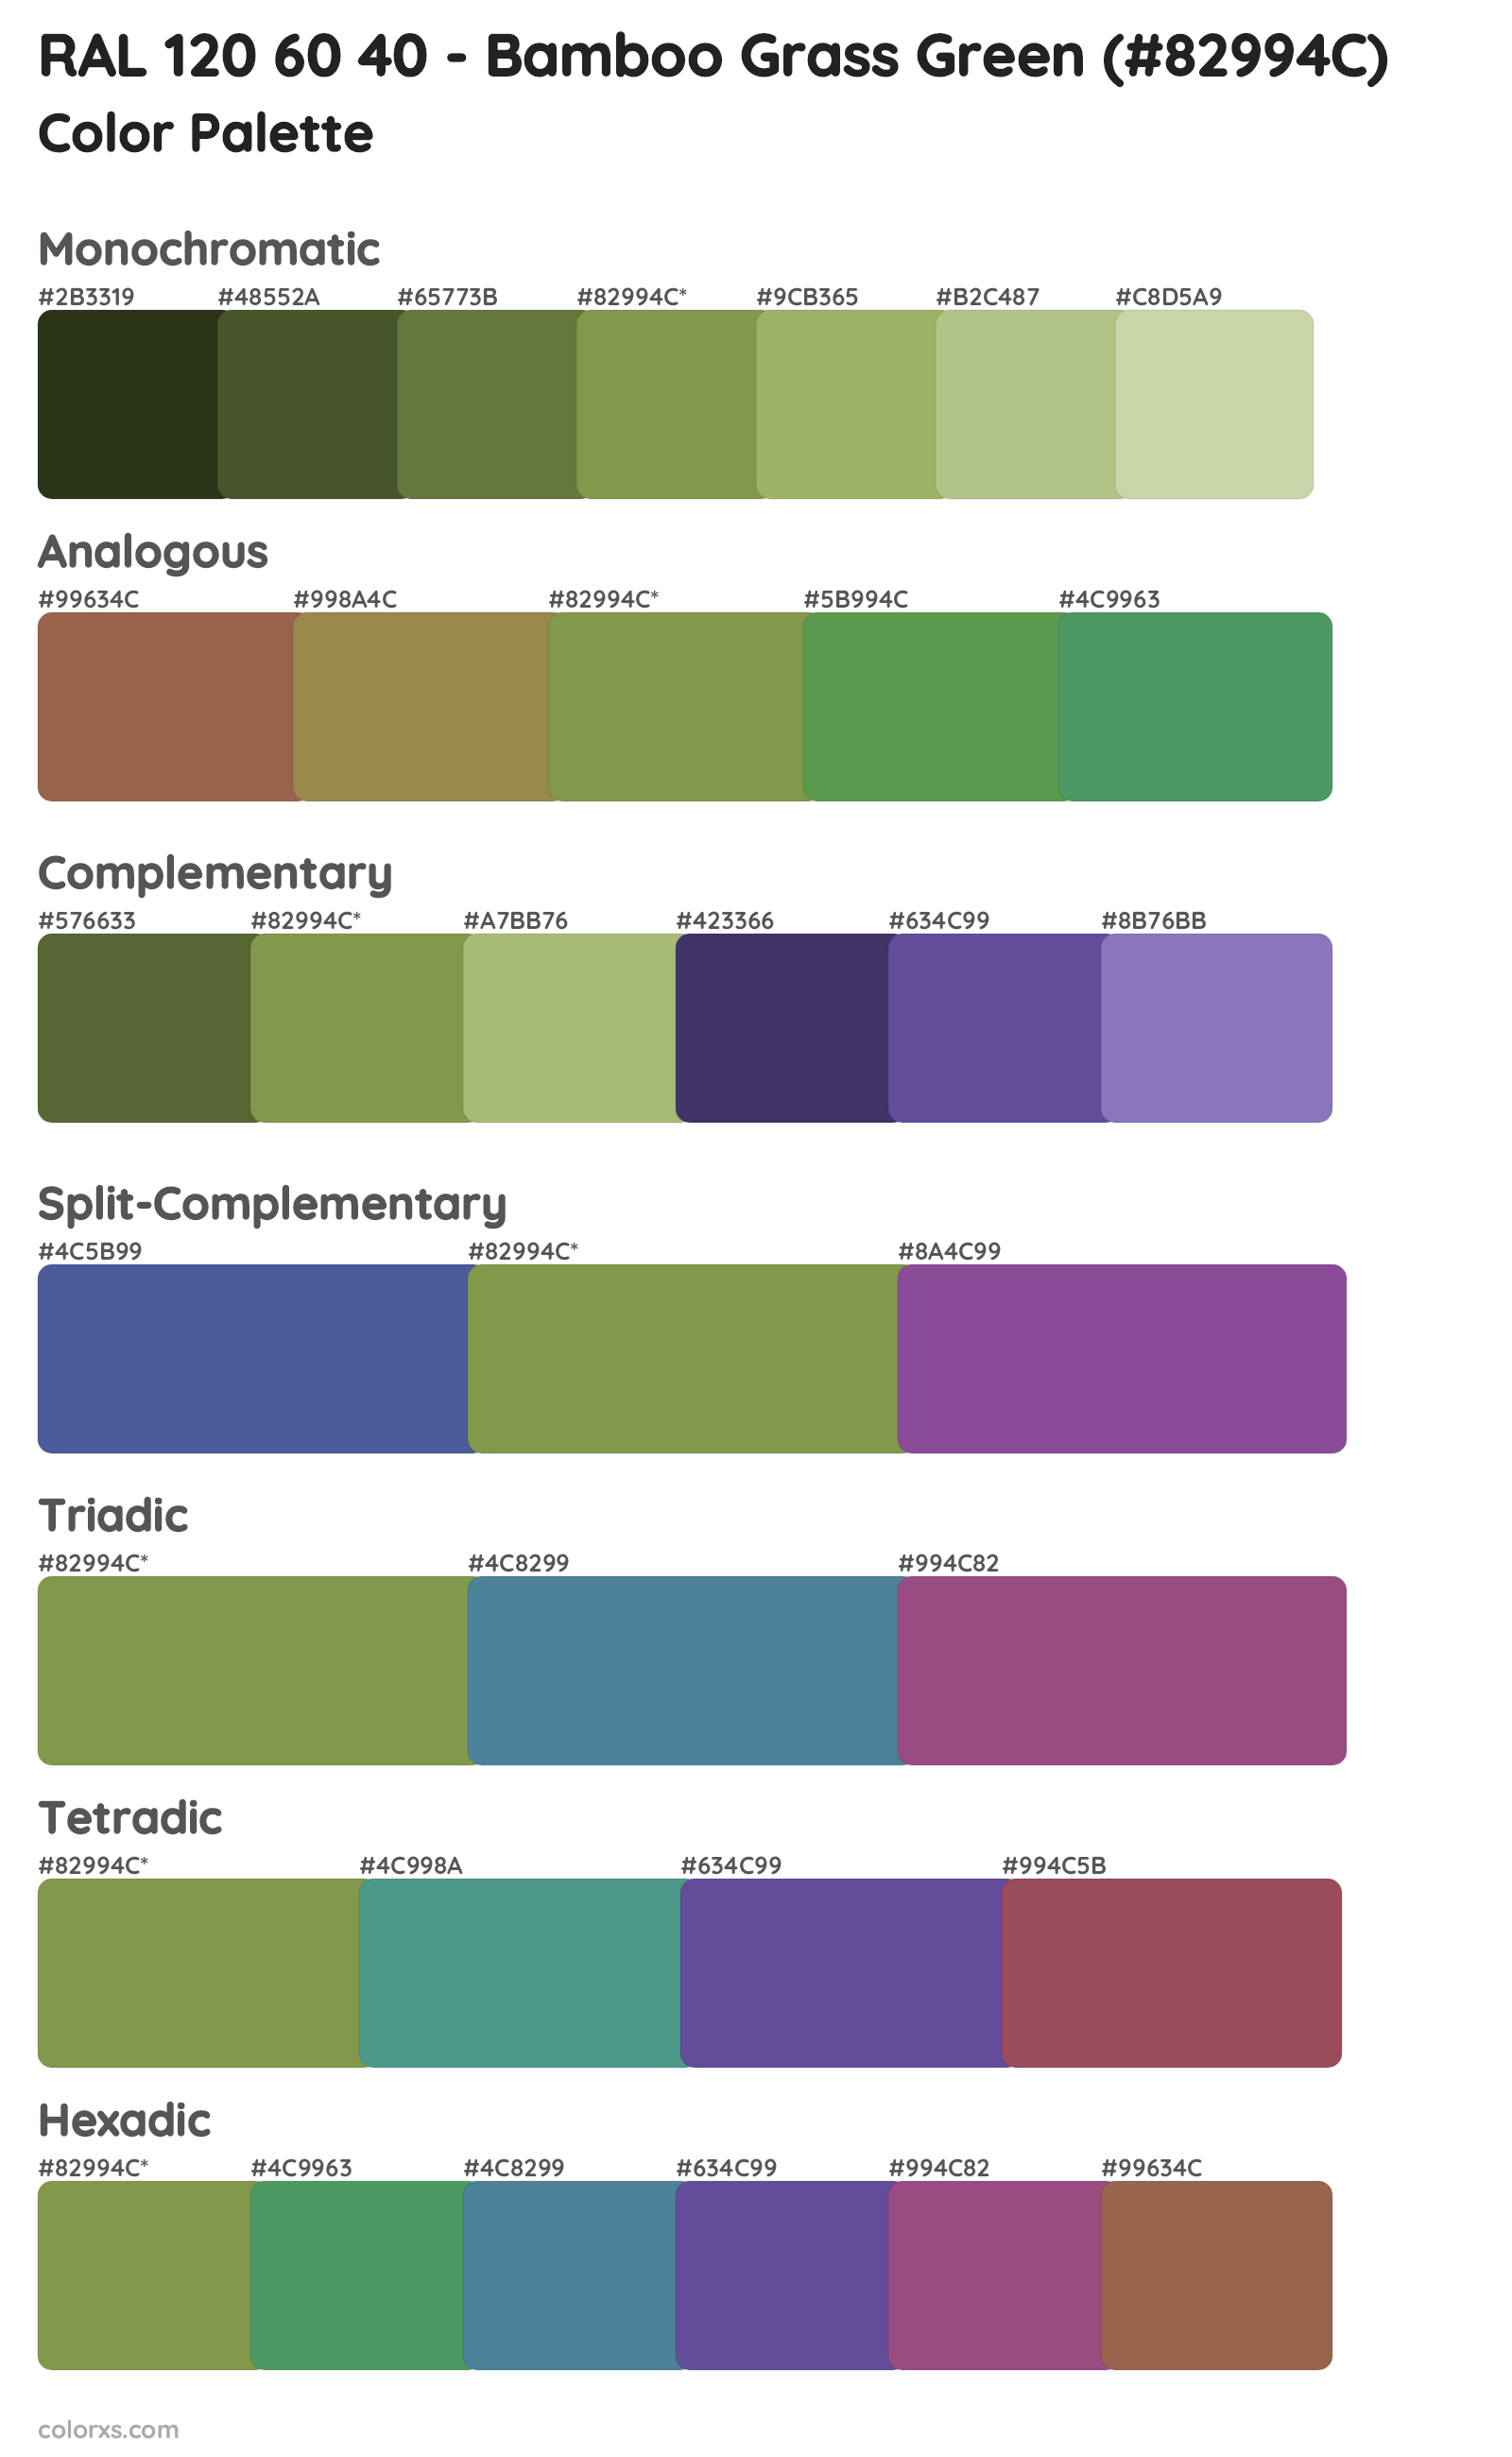 RAL 120 60 40 - Bamboo Grass Green Color Scheme Palettes